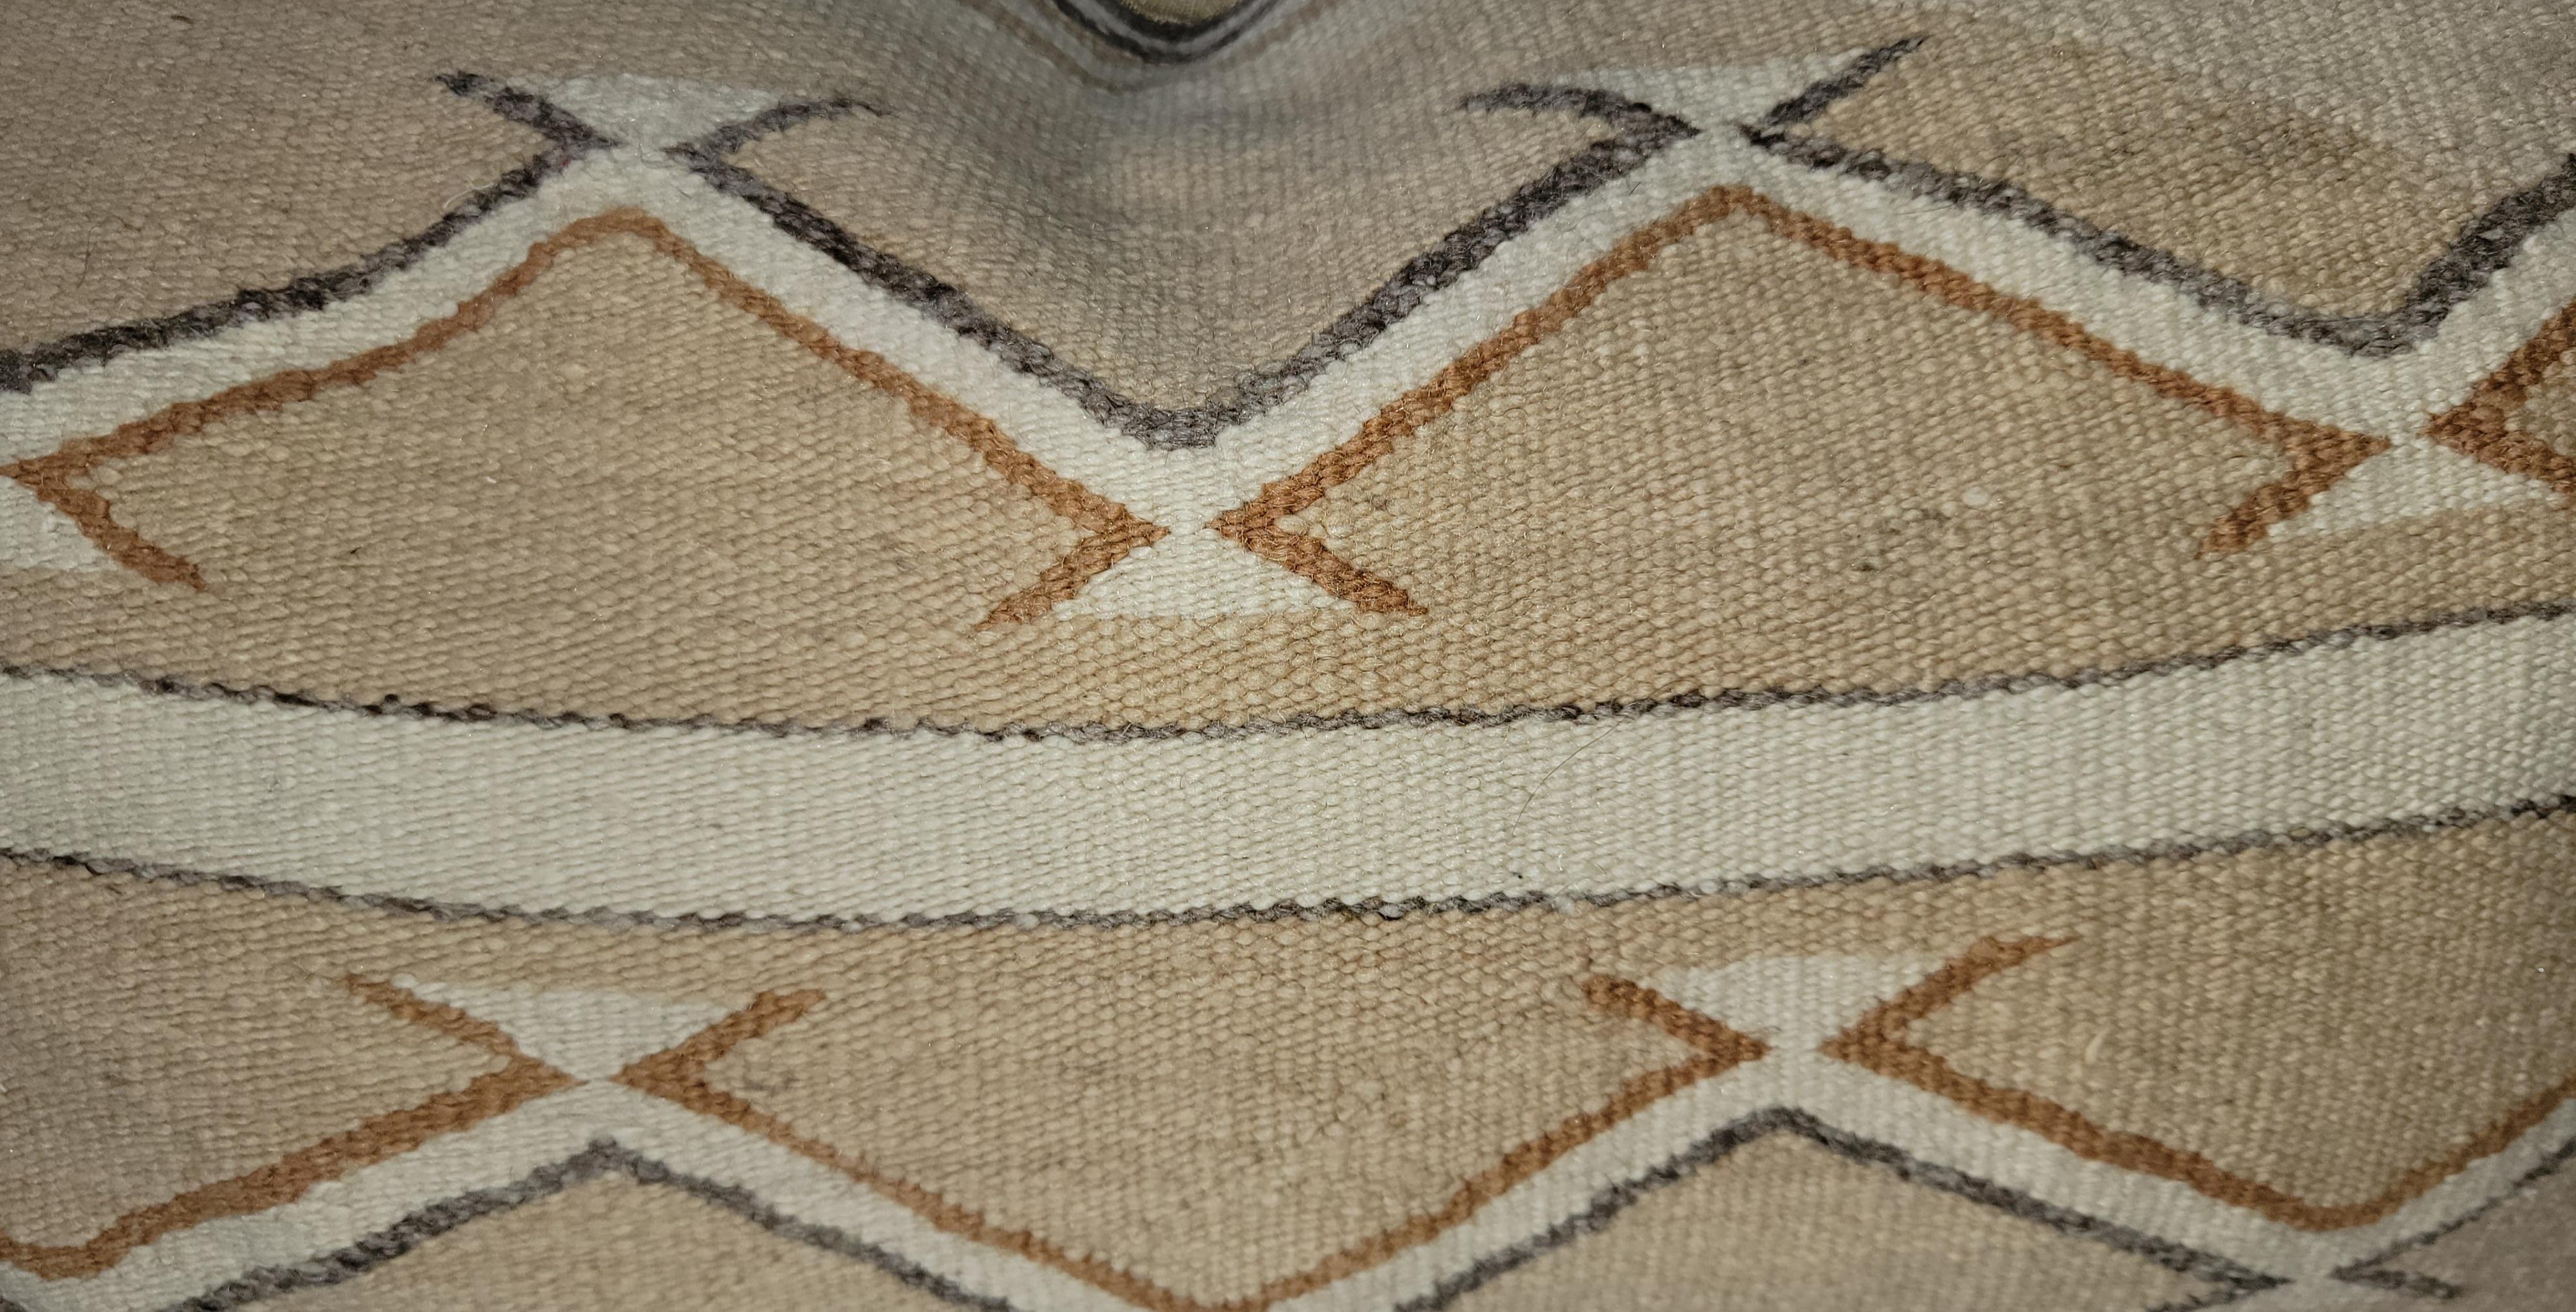 Fantastic Large Indain Weaving Pillow. Pale Golden Yellow, Gray, off White Colors. Beautiful backing.
Feather and Down Insert. Zippered Casing.